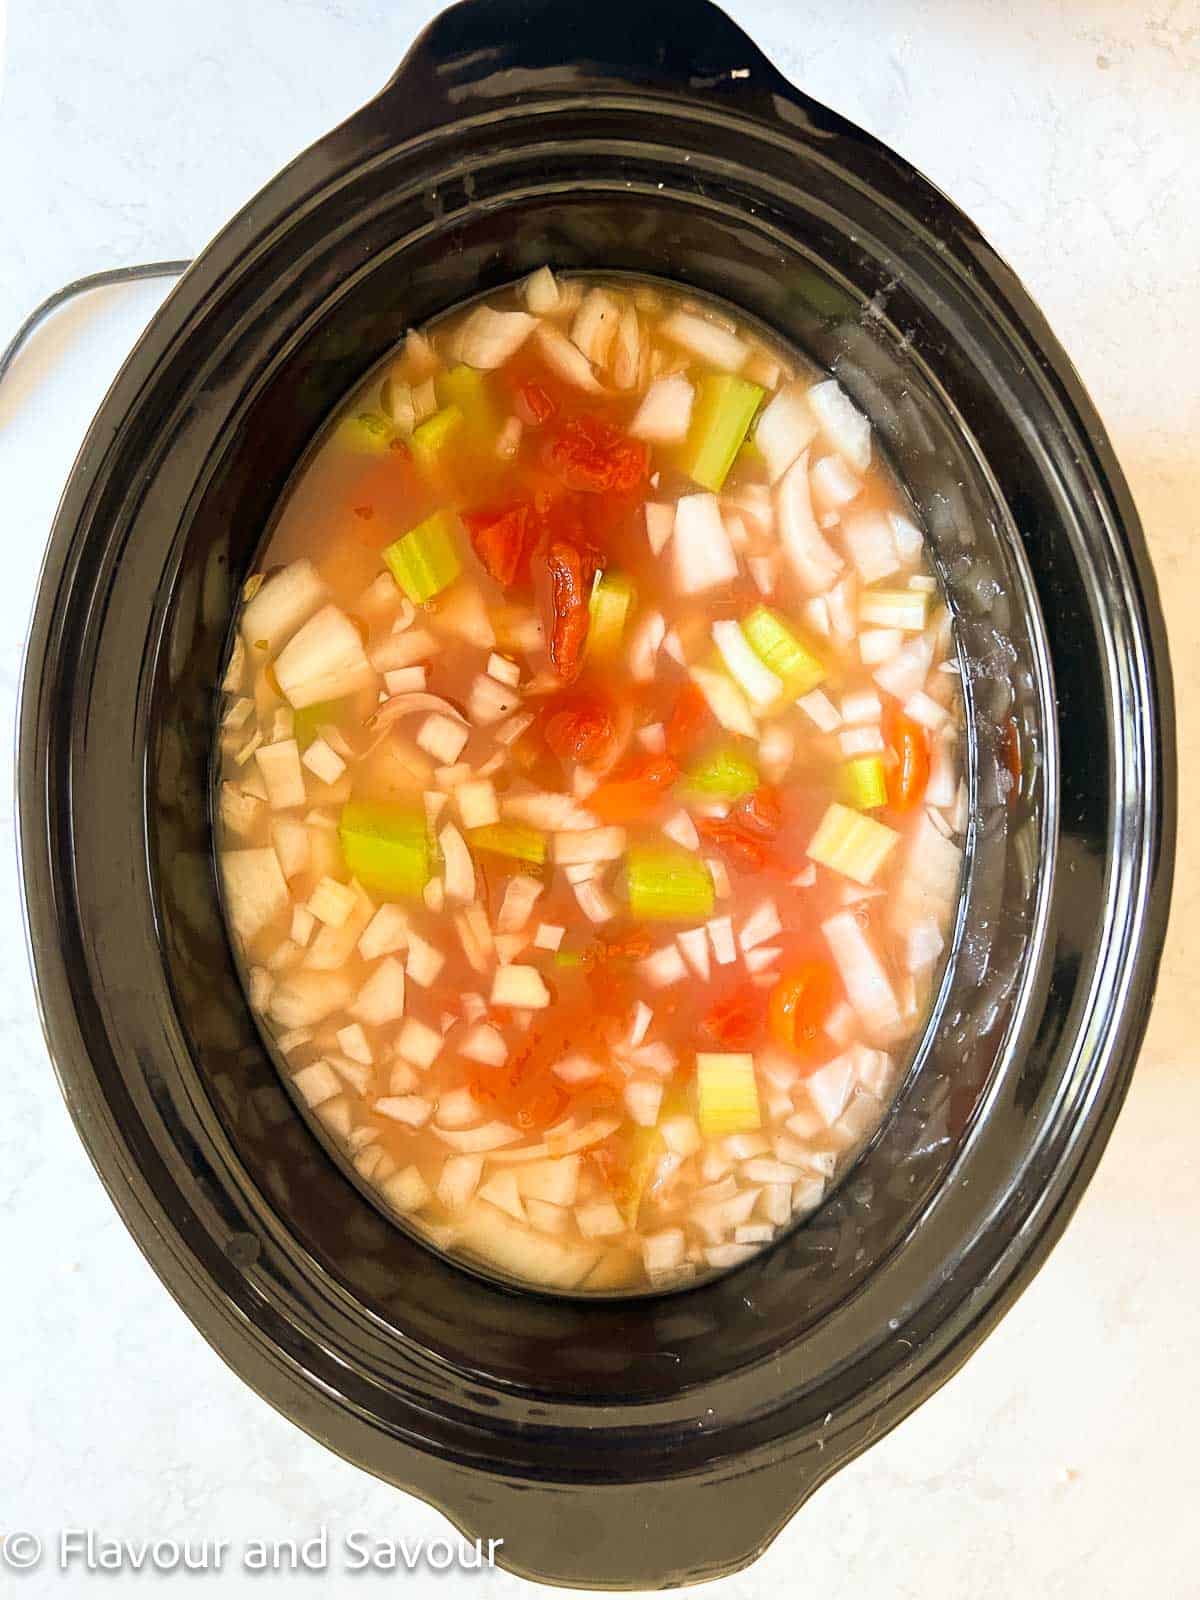 Lentil and sausage stew in a slow cooker, ready to cook.